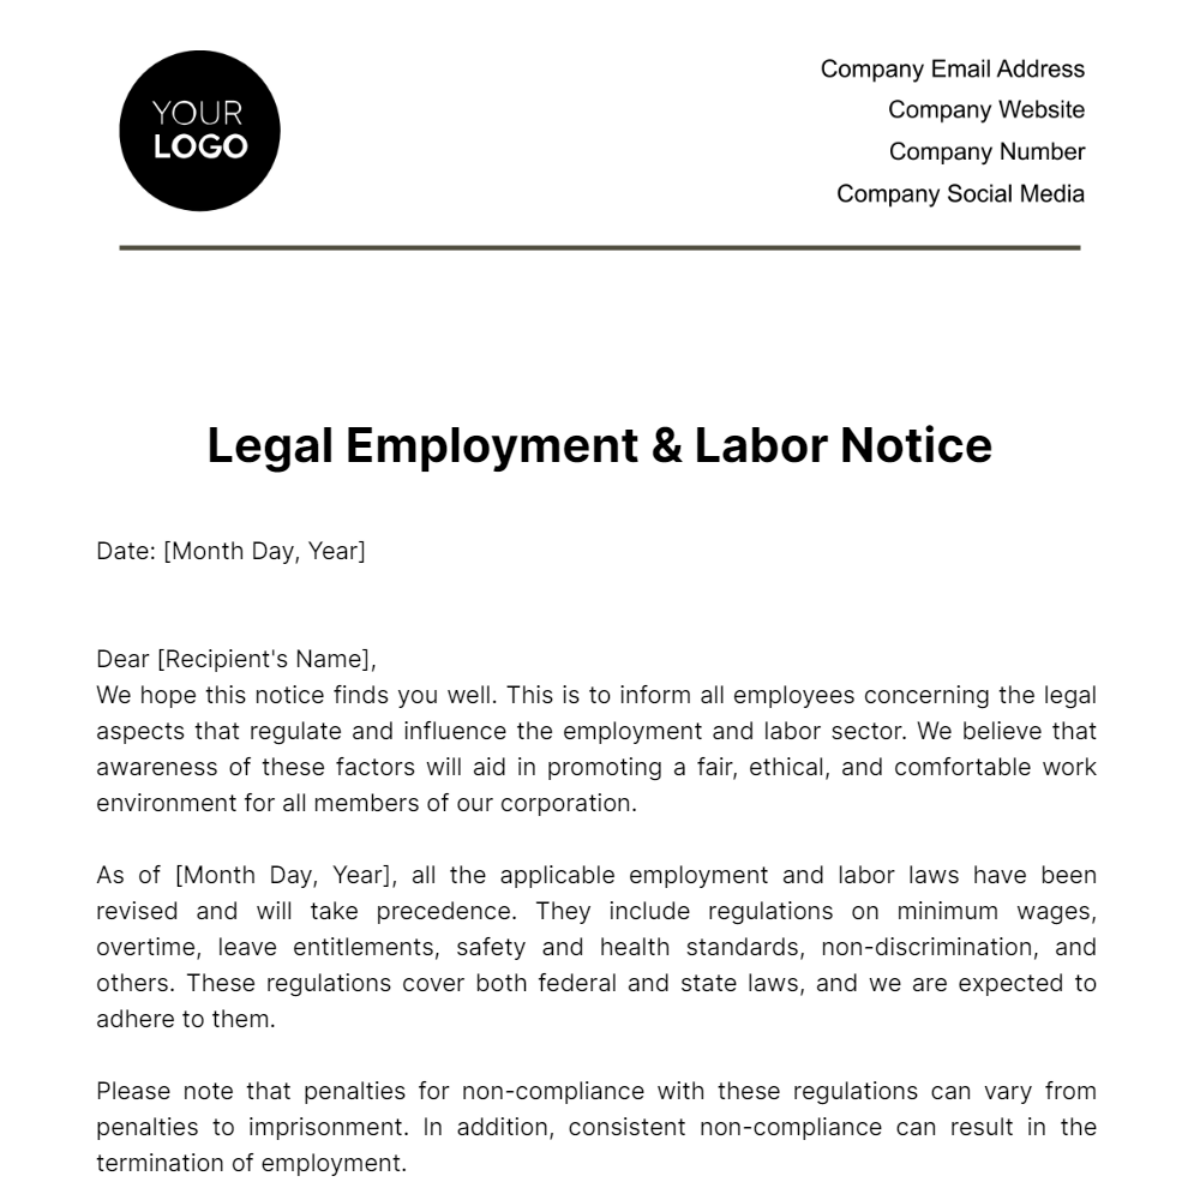 Free Legal Employment & Labor Notice Template